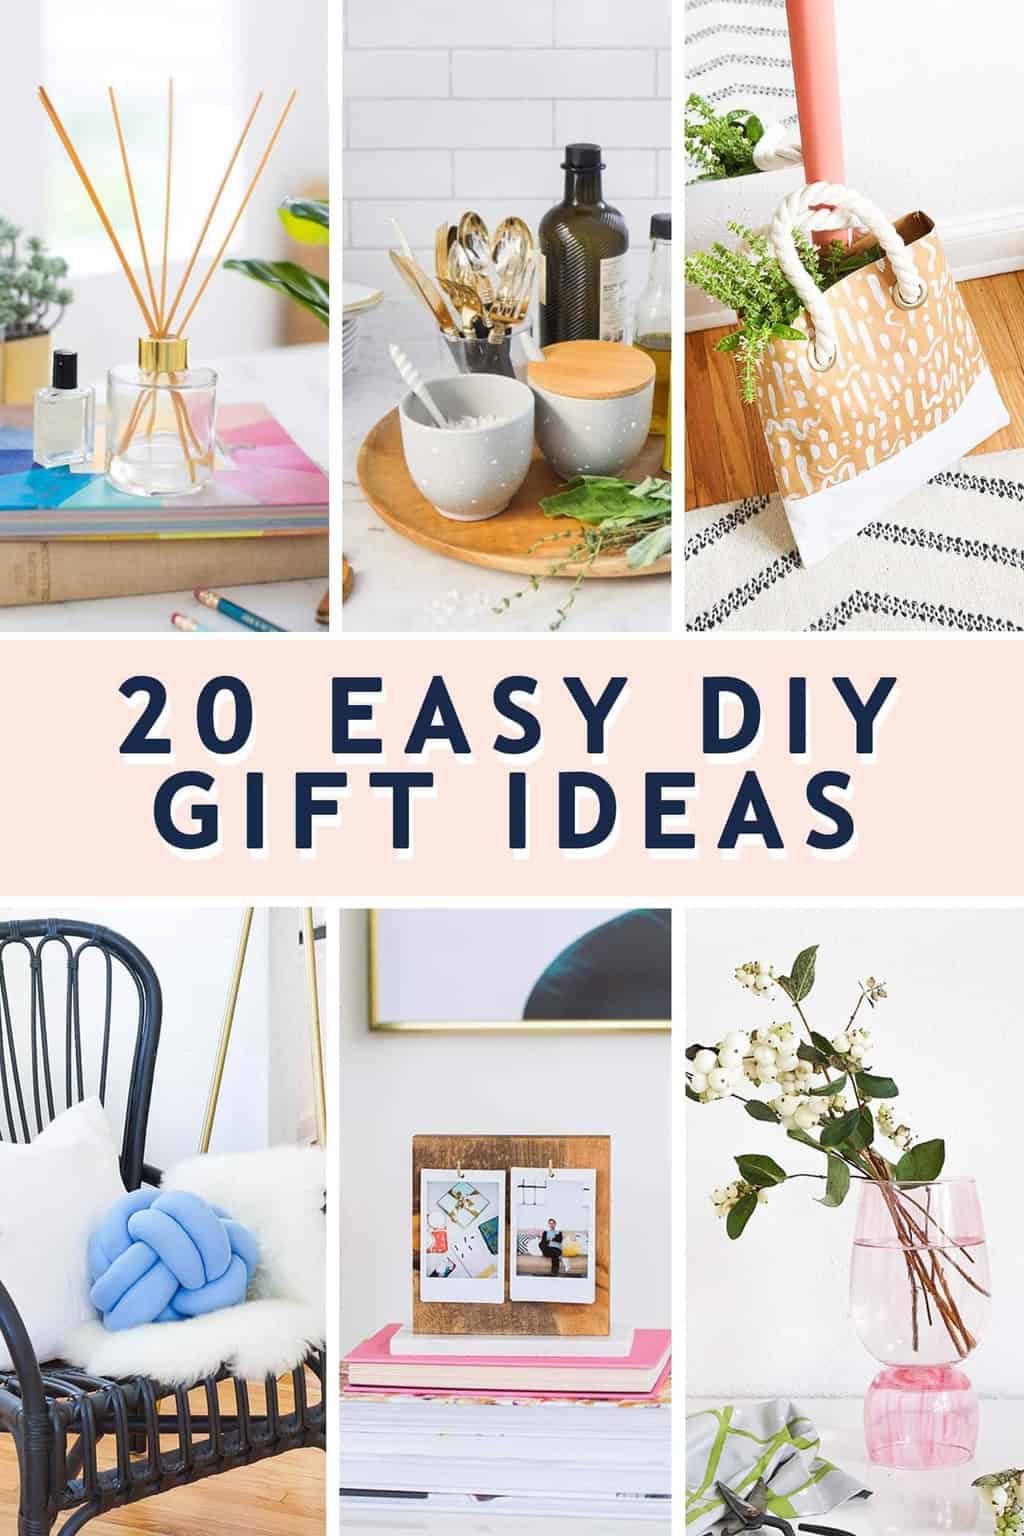 Handmade Gifts Ideas Easy Diy For Friends And Family